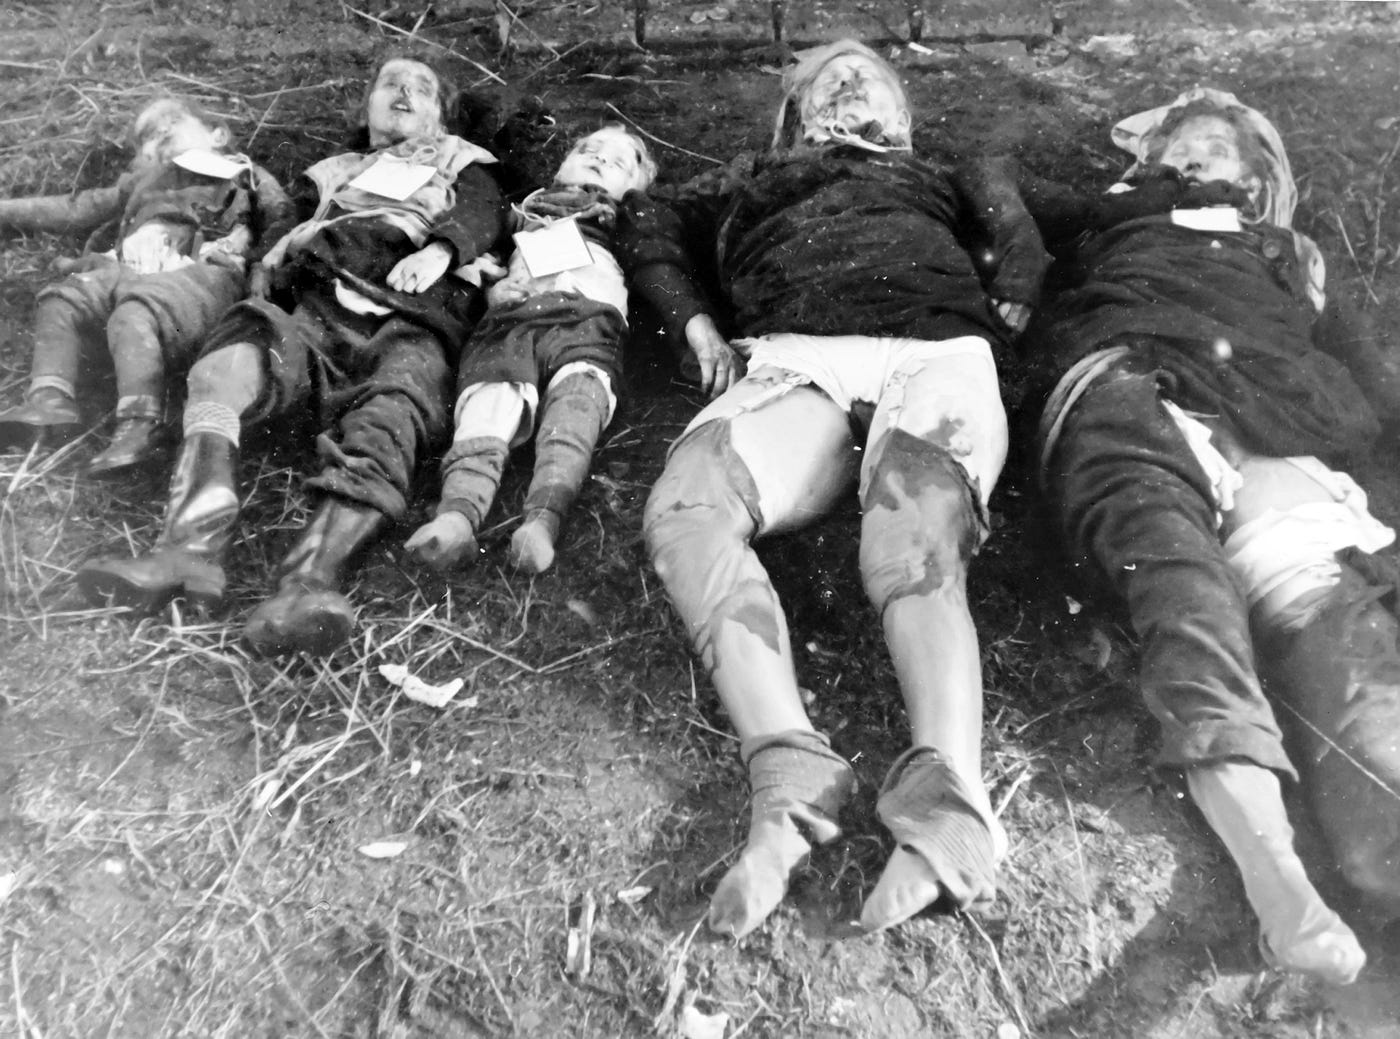 The Horrific Mass Rape of German Women at the End of World War II | Lessons  from History